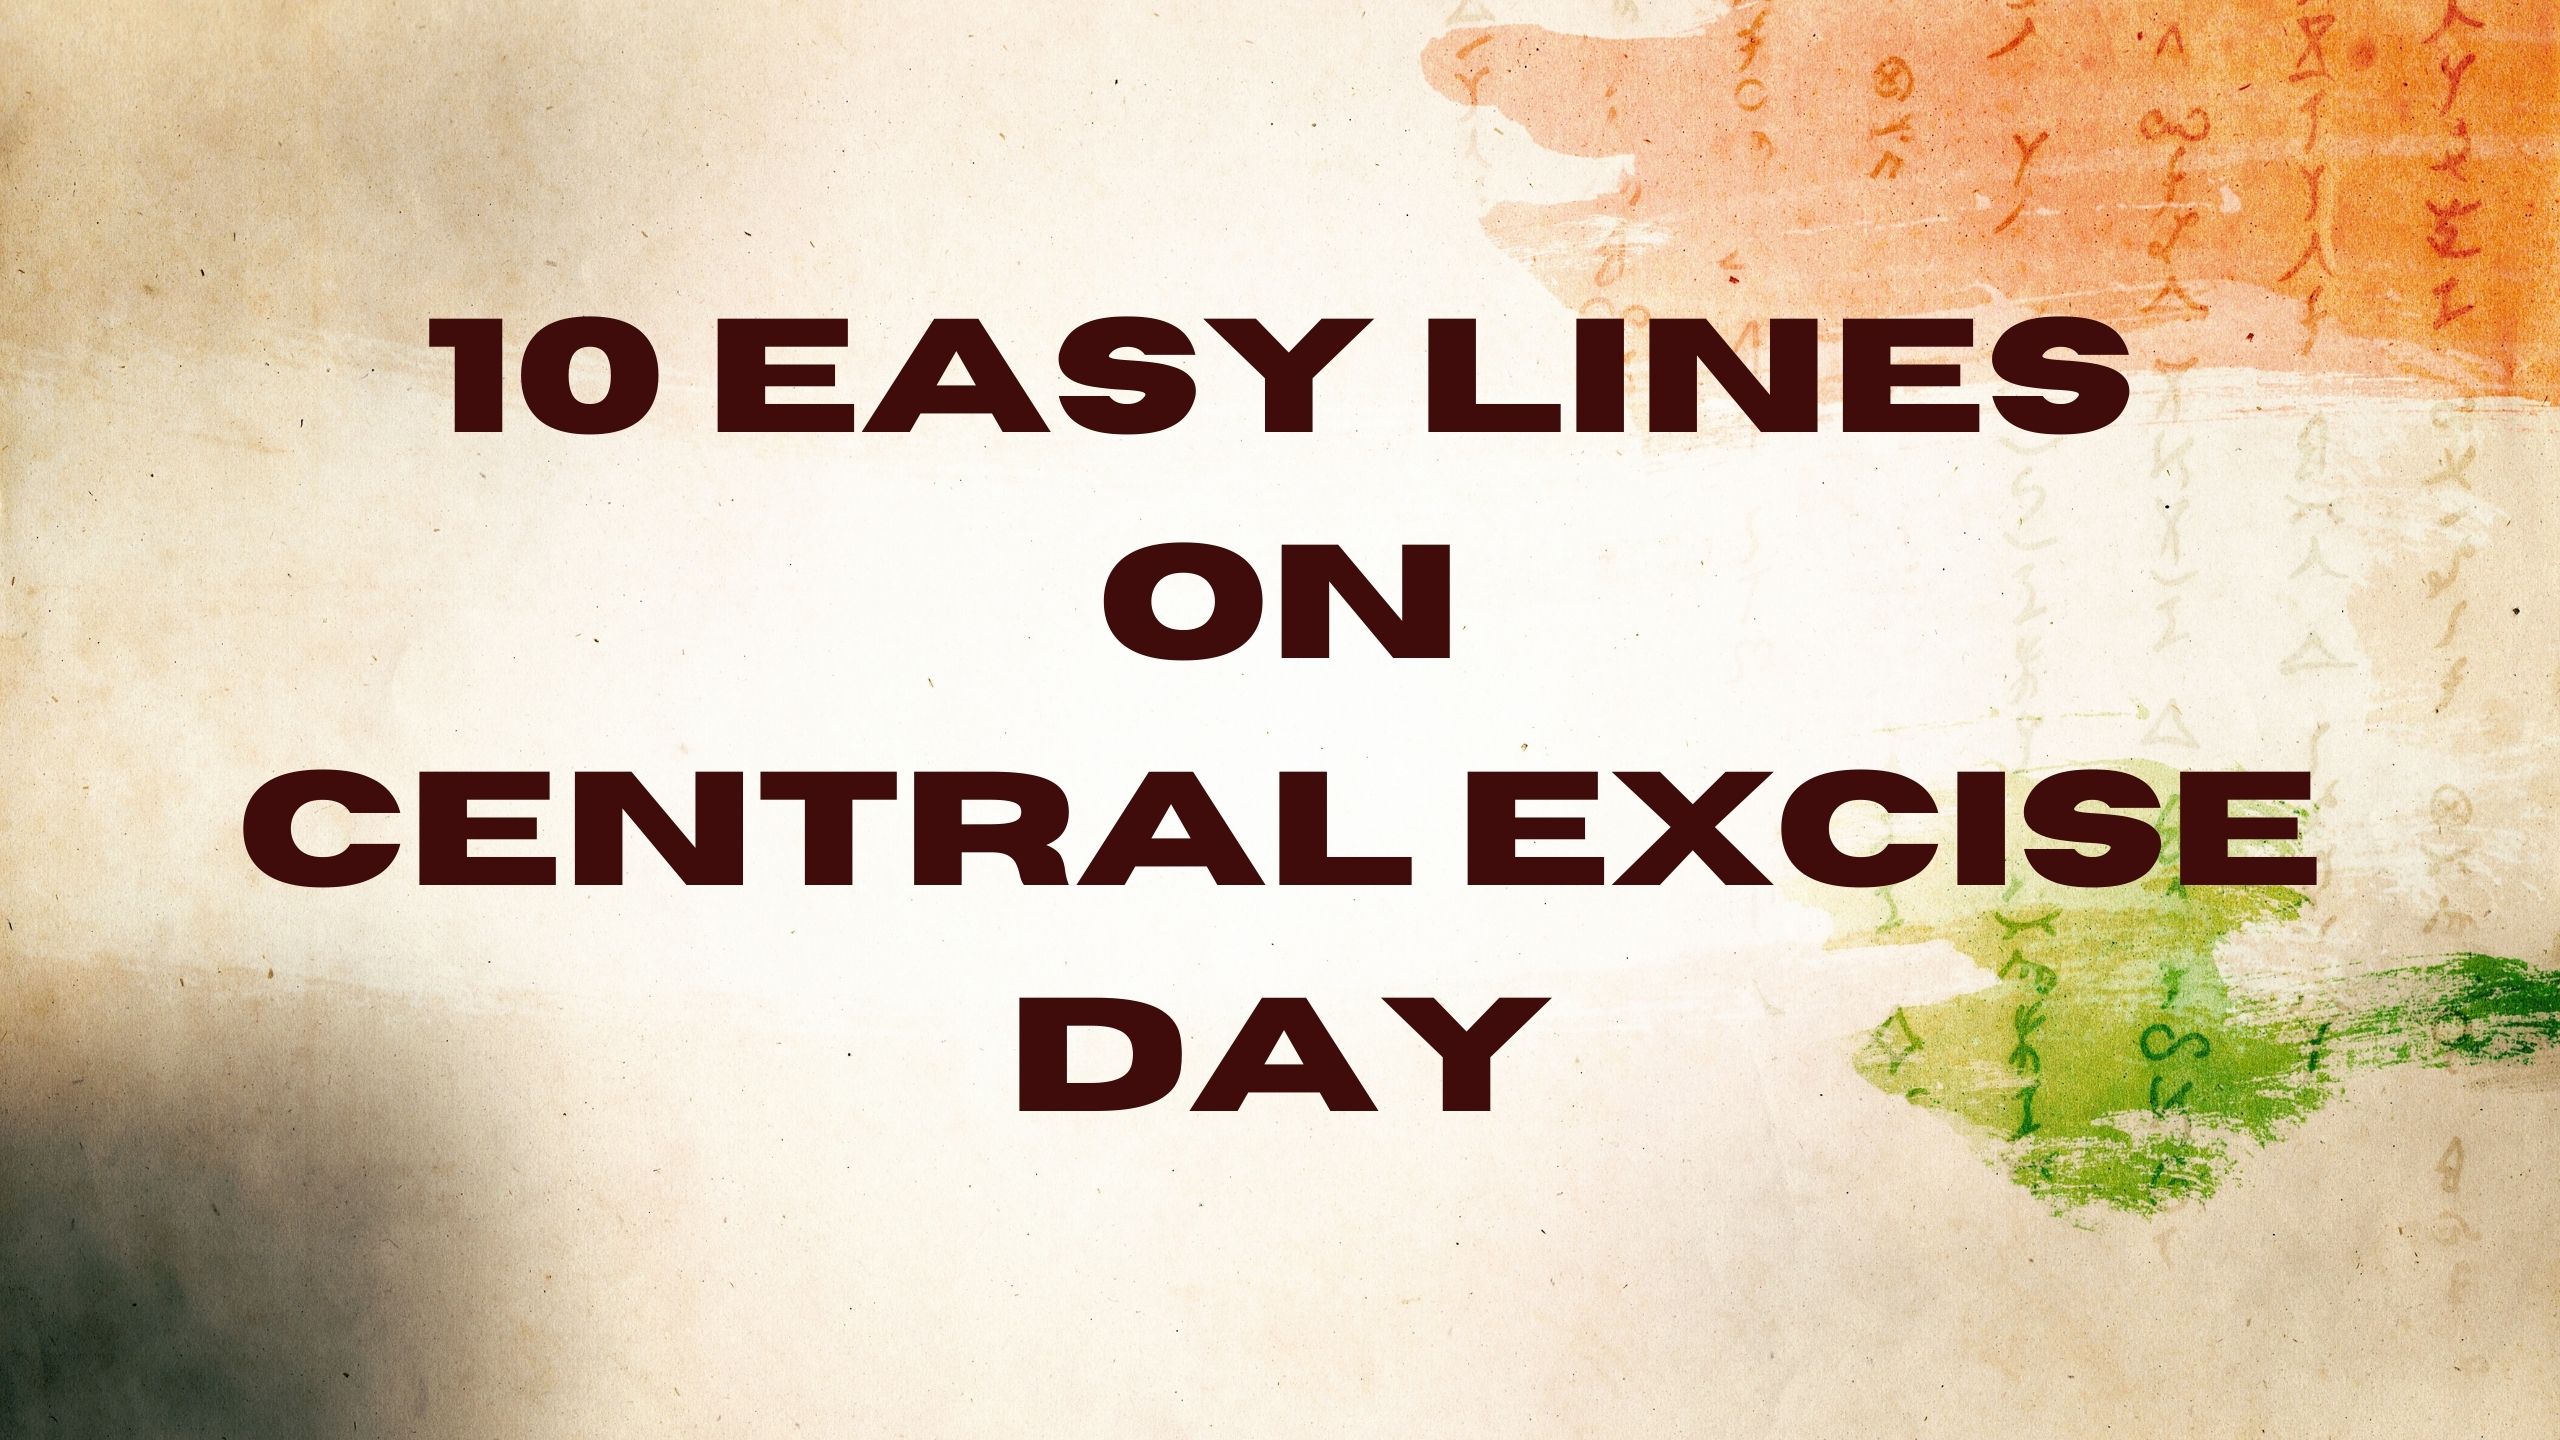 10 Easy Lines on Central Excise Day